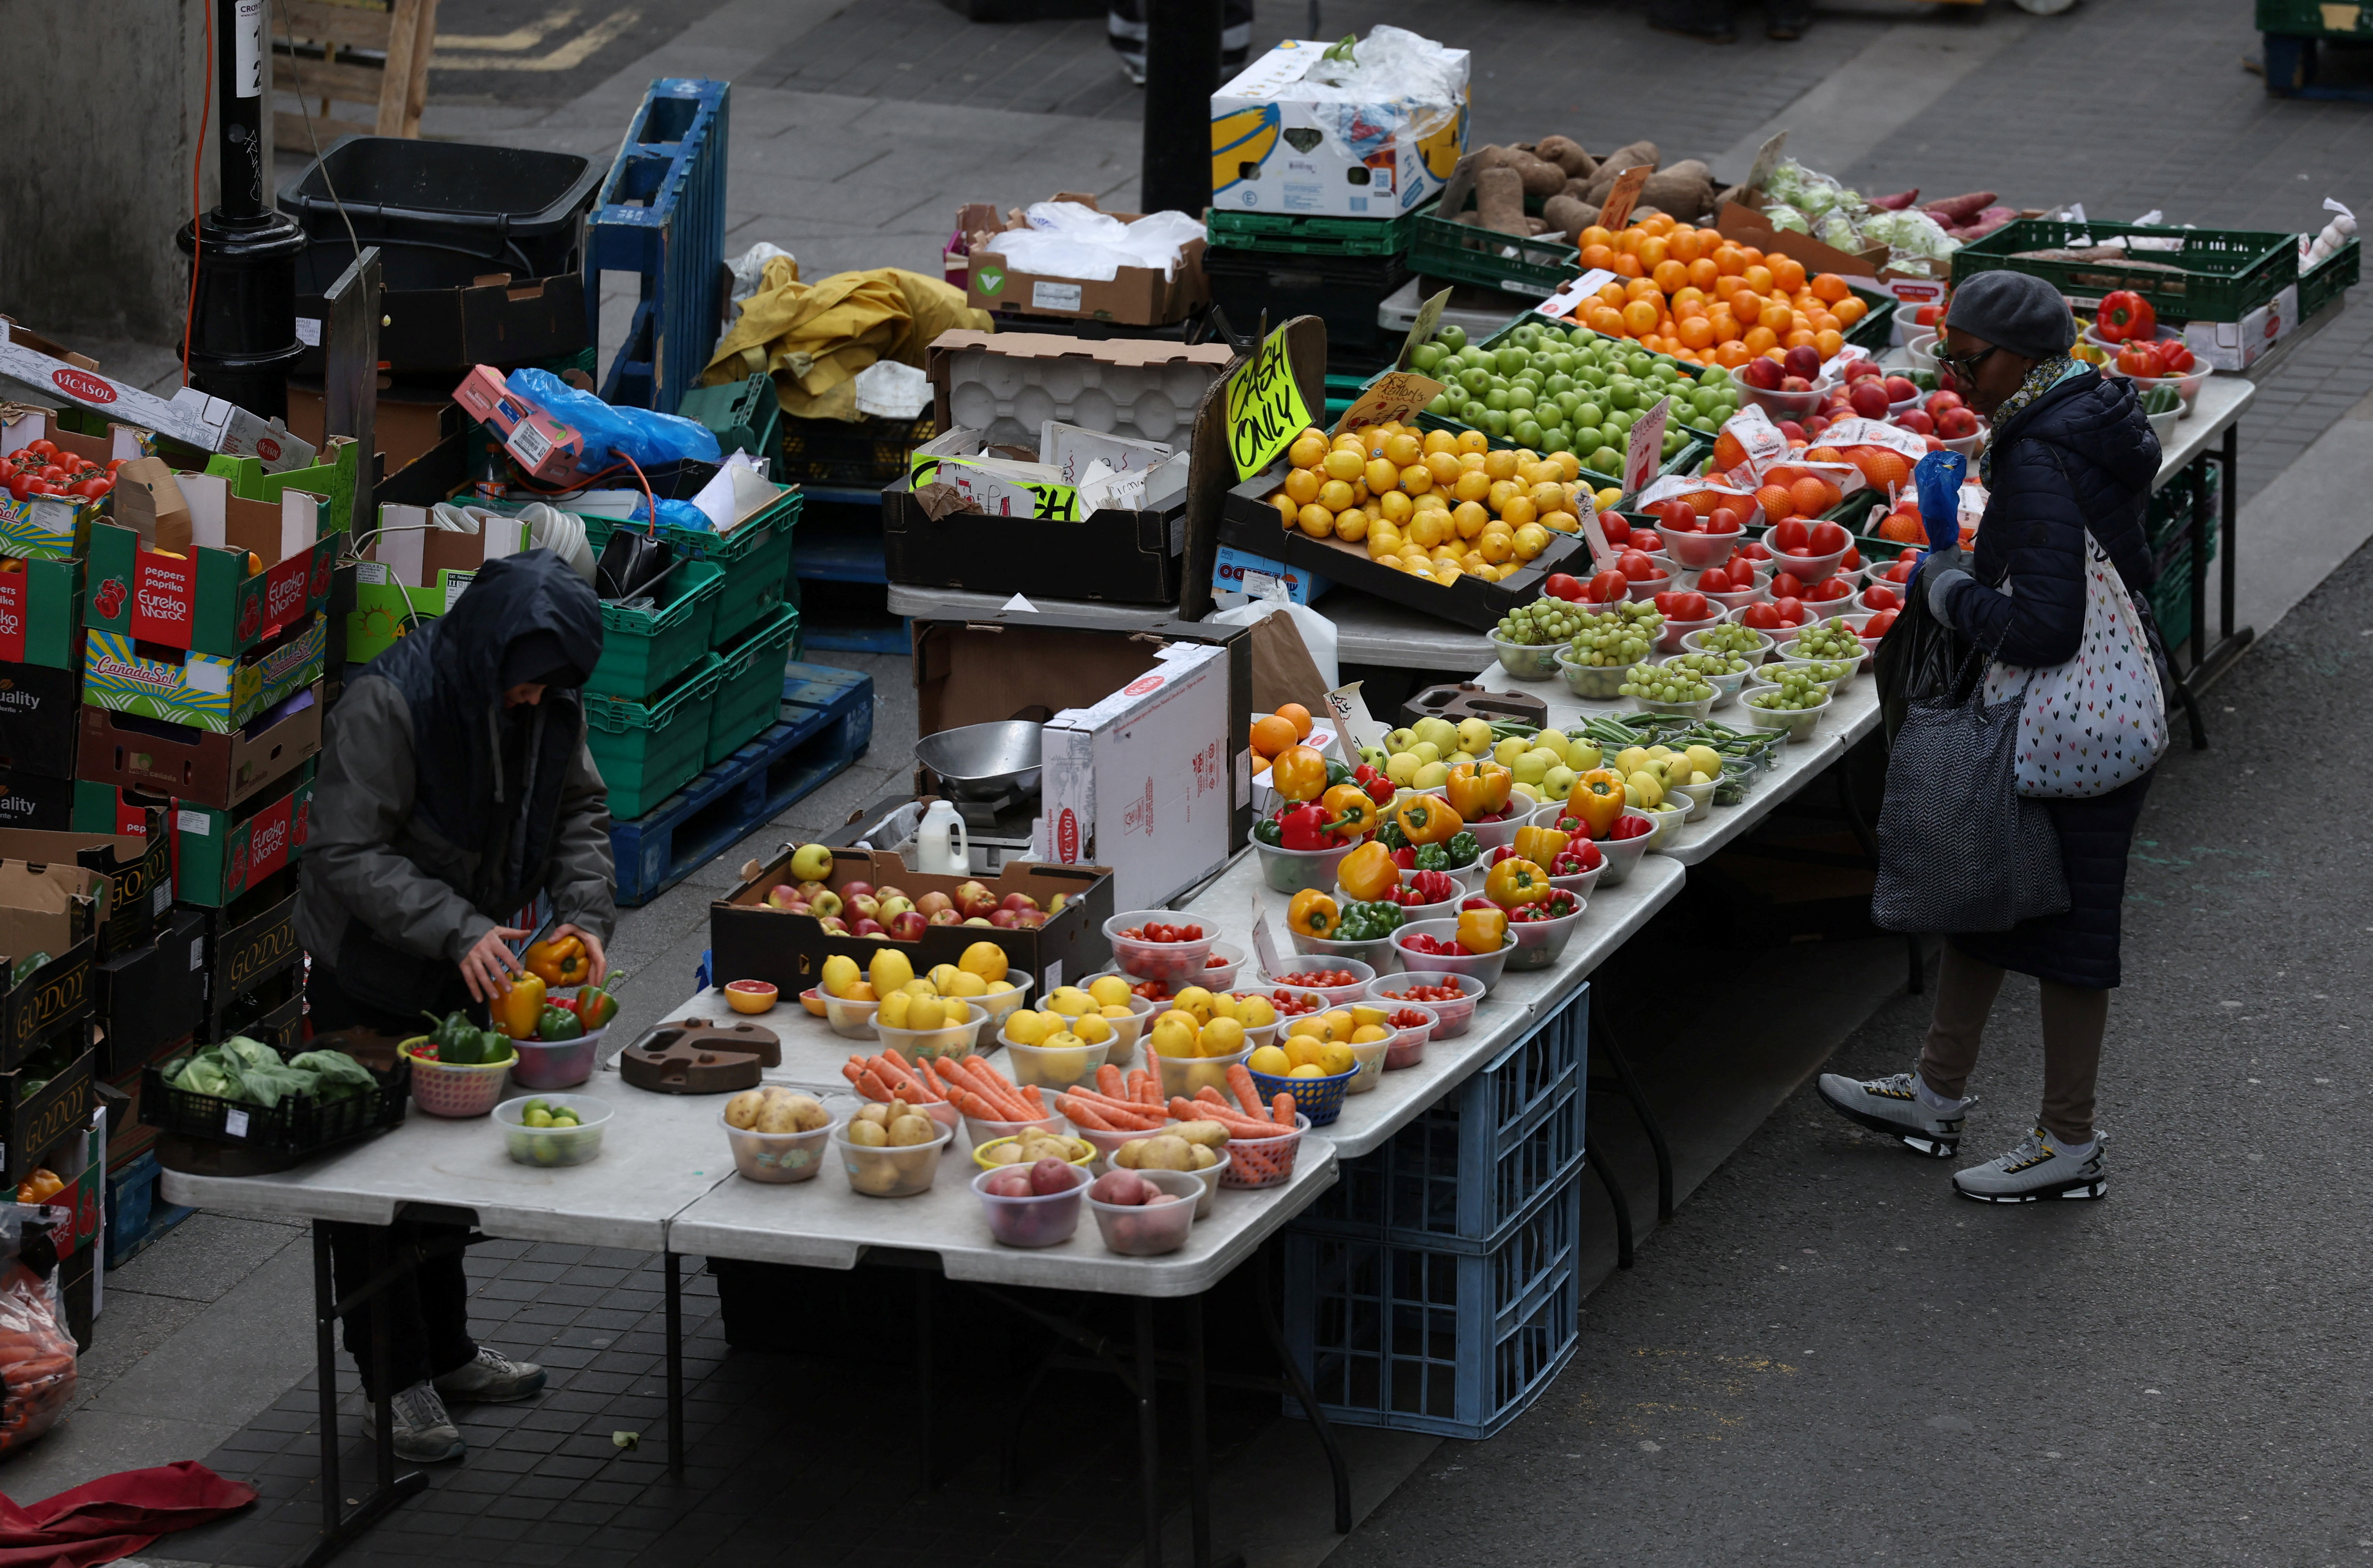 A customer waits to be served at a stall on Surrey Street market in Croydon